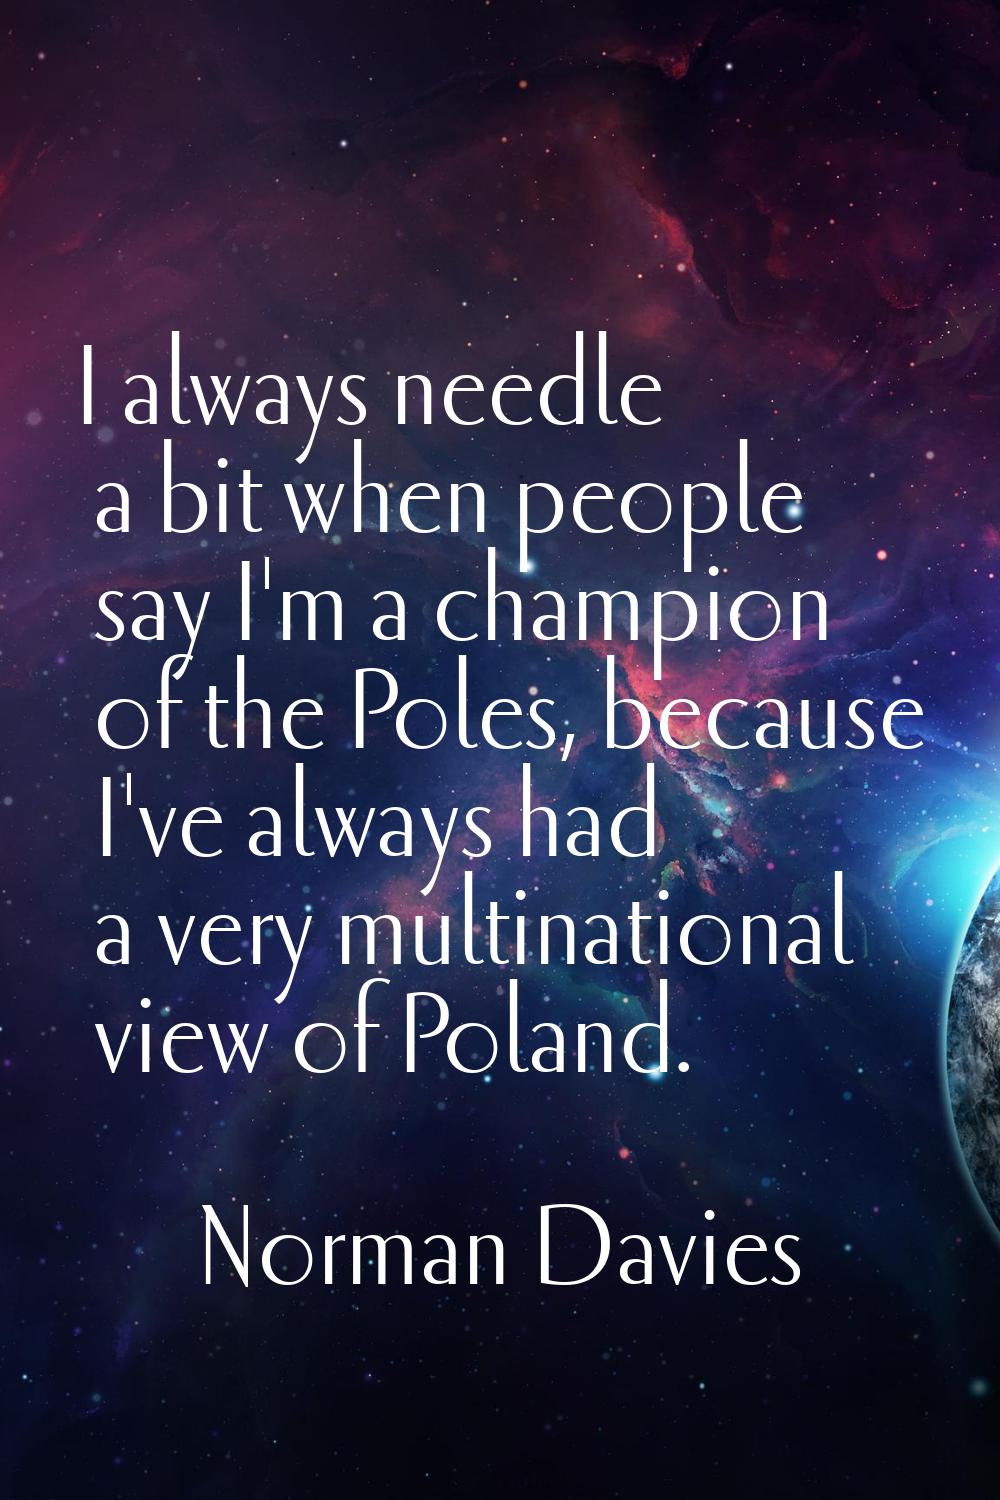 I always needle a bit when people say I'm a champion of the Poles, because I've always had a very m